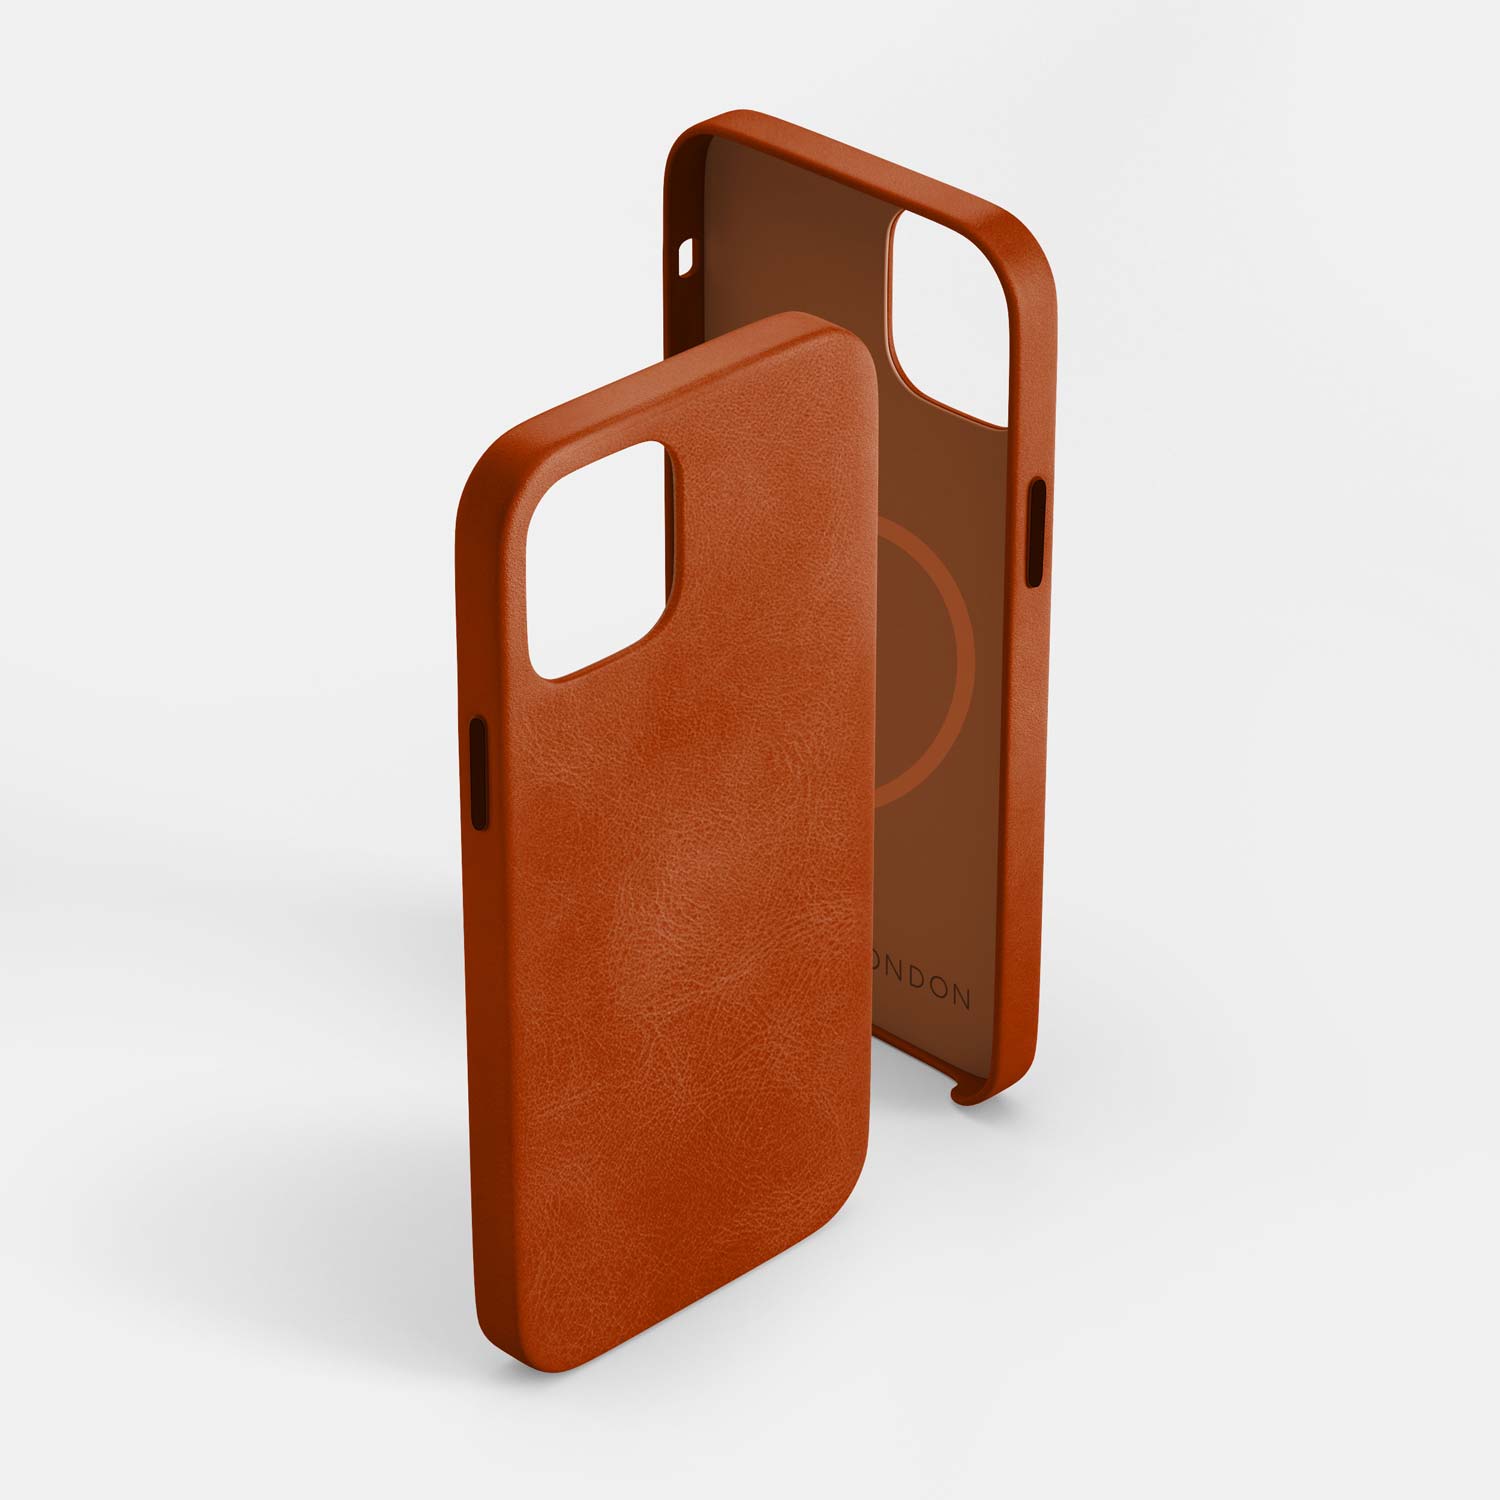 iPhone 14 Leather Case - Journey iPhone 14 / Saddle Brown